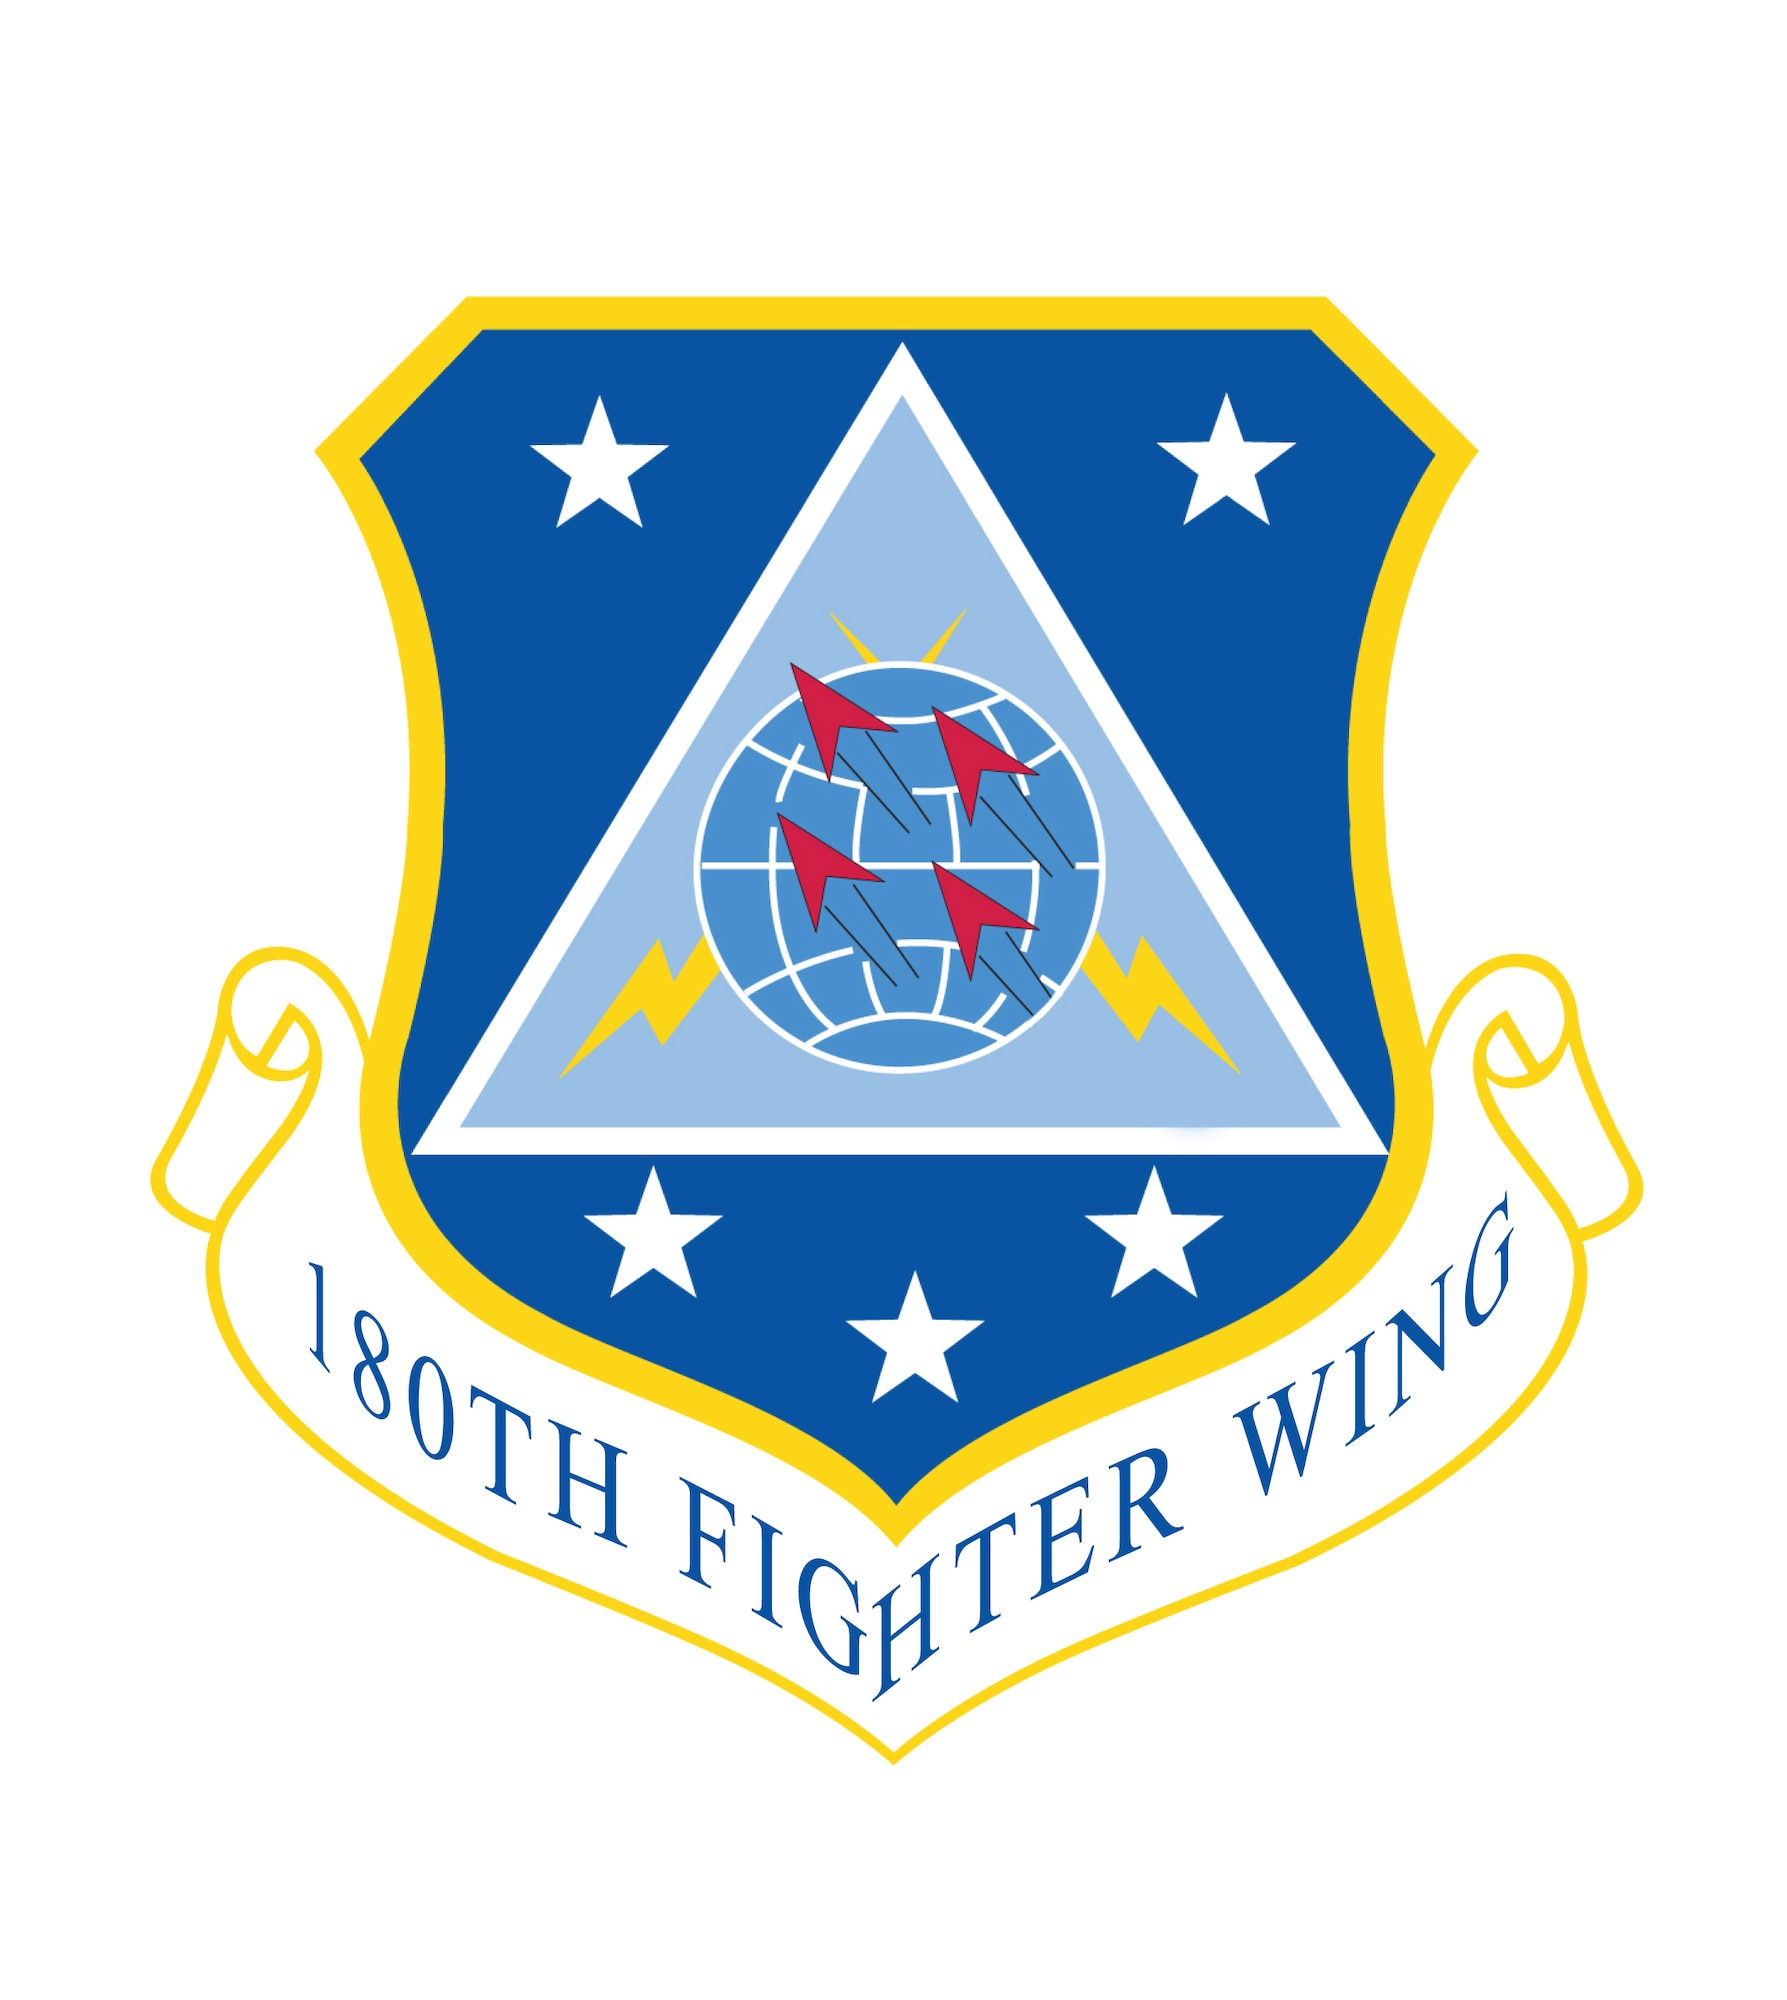 The origins of the 180th Fighter Wing's organizational emblem date back to June 22, 1964 when the unit held a group wide design contest in search of a design that could be used to symbolically represent the newly formed 180th Tactical Fighter Group. The emblem was approved and became recognized federally on October 15, 1962. 

In accordance with Air Force guidance of the time, the design for organizational emblems had to meet several requirements before being approved by the National Guard Bureau. To be considered for approval, all ideas expressed within the design had to be original, simple, and in good taste. The emblem could not imitate designs of other organizations, portray specific types of equipment or display geographical locations. 

Another requirement is that each individual symbol in the design have some significance to the organization. The significance as written in 1964 is as follows: 

The four dart like figures symbolize the flying mission of the unit; the formation in which they are placed denotes the teamwork and coordination which is necessary within the group to successfully complete all facets of the assigned mission. 

The globe symbolizes the requirement levied on the group and its capability to rapidly deploy to any location on earth in accordance with the Air Force's concept of global disturbances. 

The yellow lightening streak symbolizes the speed and power of the Group aircraft and their capability to destroy those who would wage war or otherwise threaten the fundamental concepts for all mankind. It is also symbolic of the Tactical Air Commander and the Air Force Strike Command whose missions, like lightning can bring quick devastation to those who threaten our way of life. 

The black triangle symbolizes the 180th designation of this Group as it is the only geometric figure whose interior angles equal 180 degrees. Newly formed units within the group will have individual pictorial emblems based on the triangle. 

The ultra